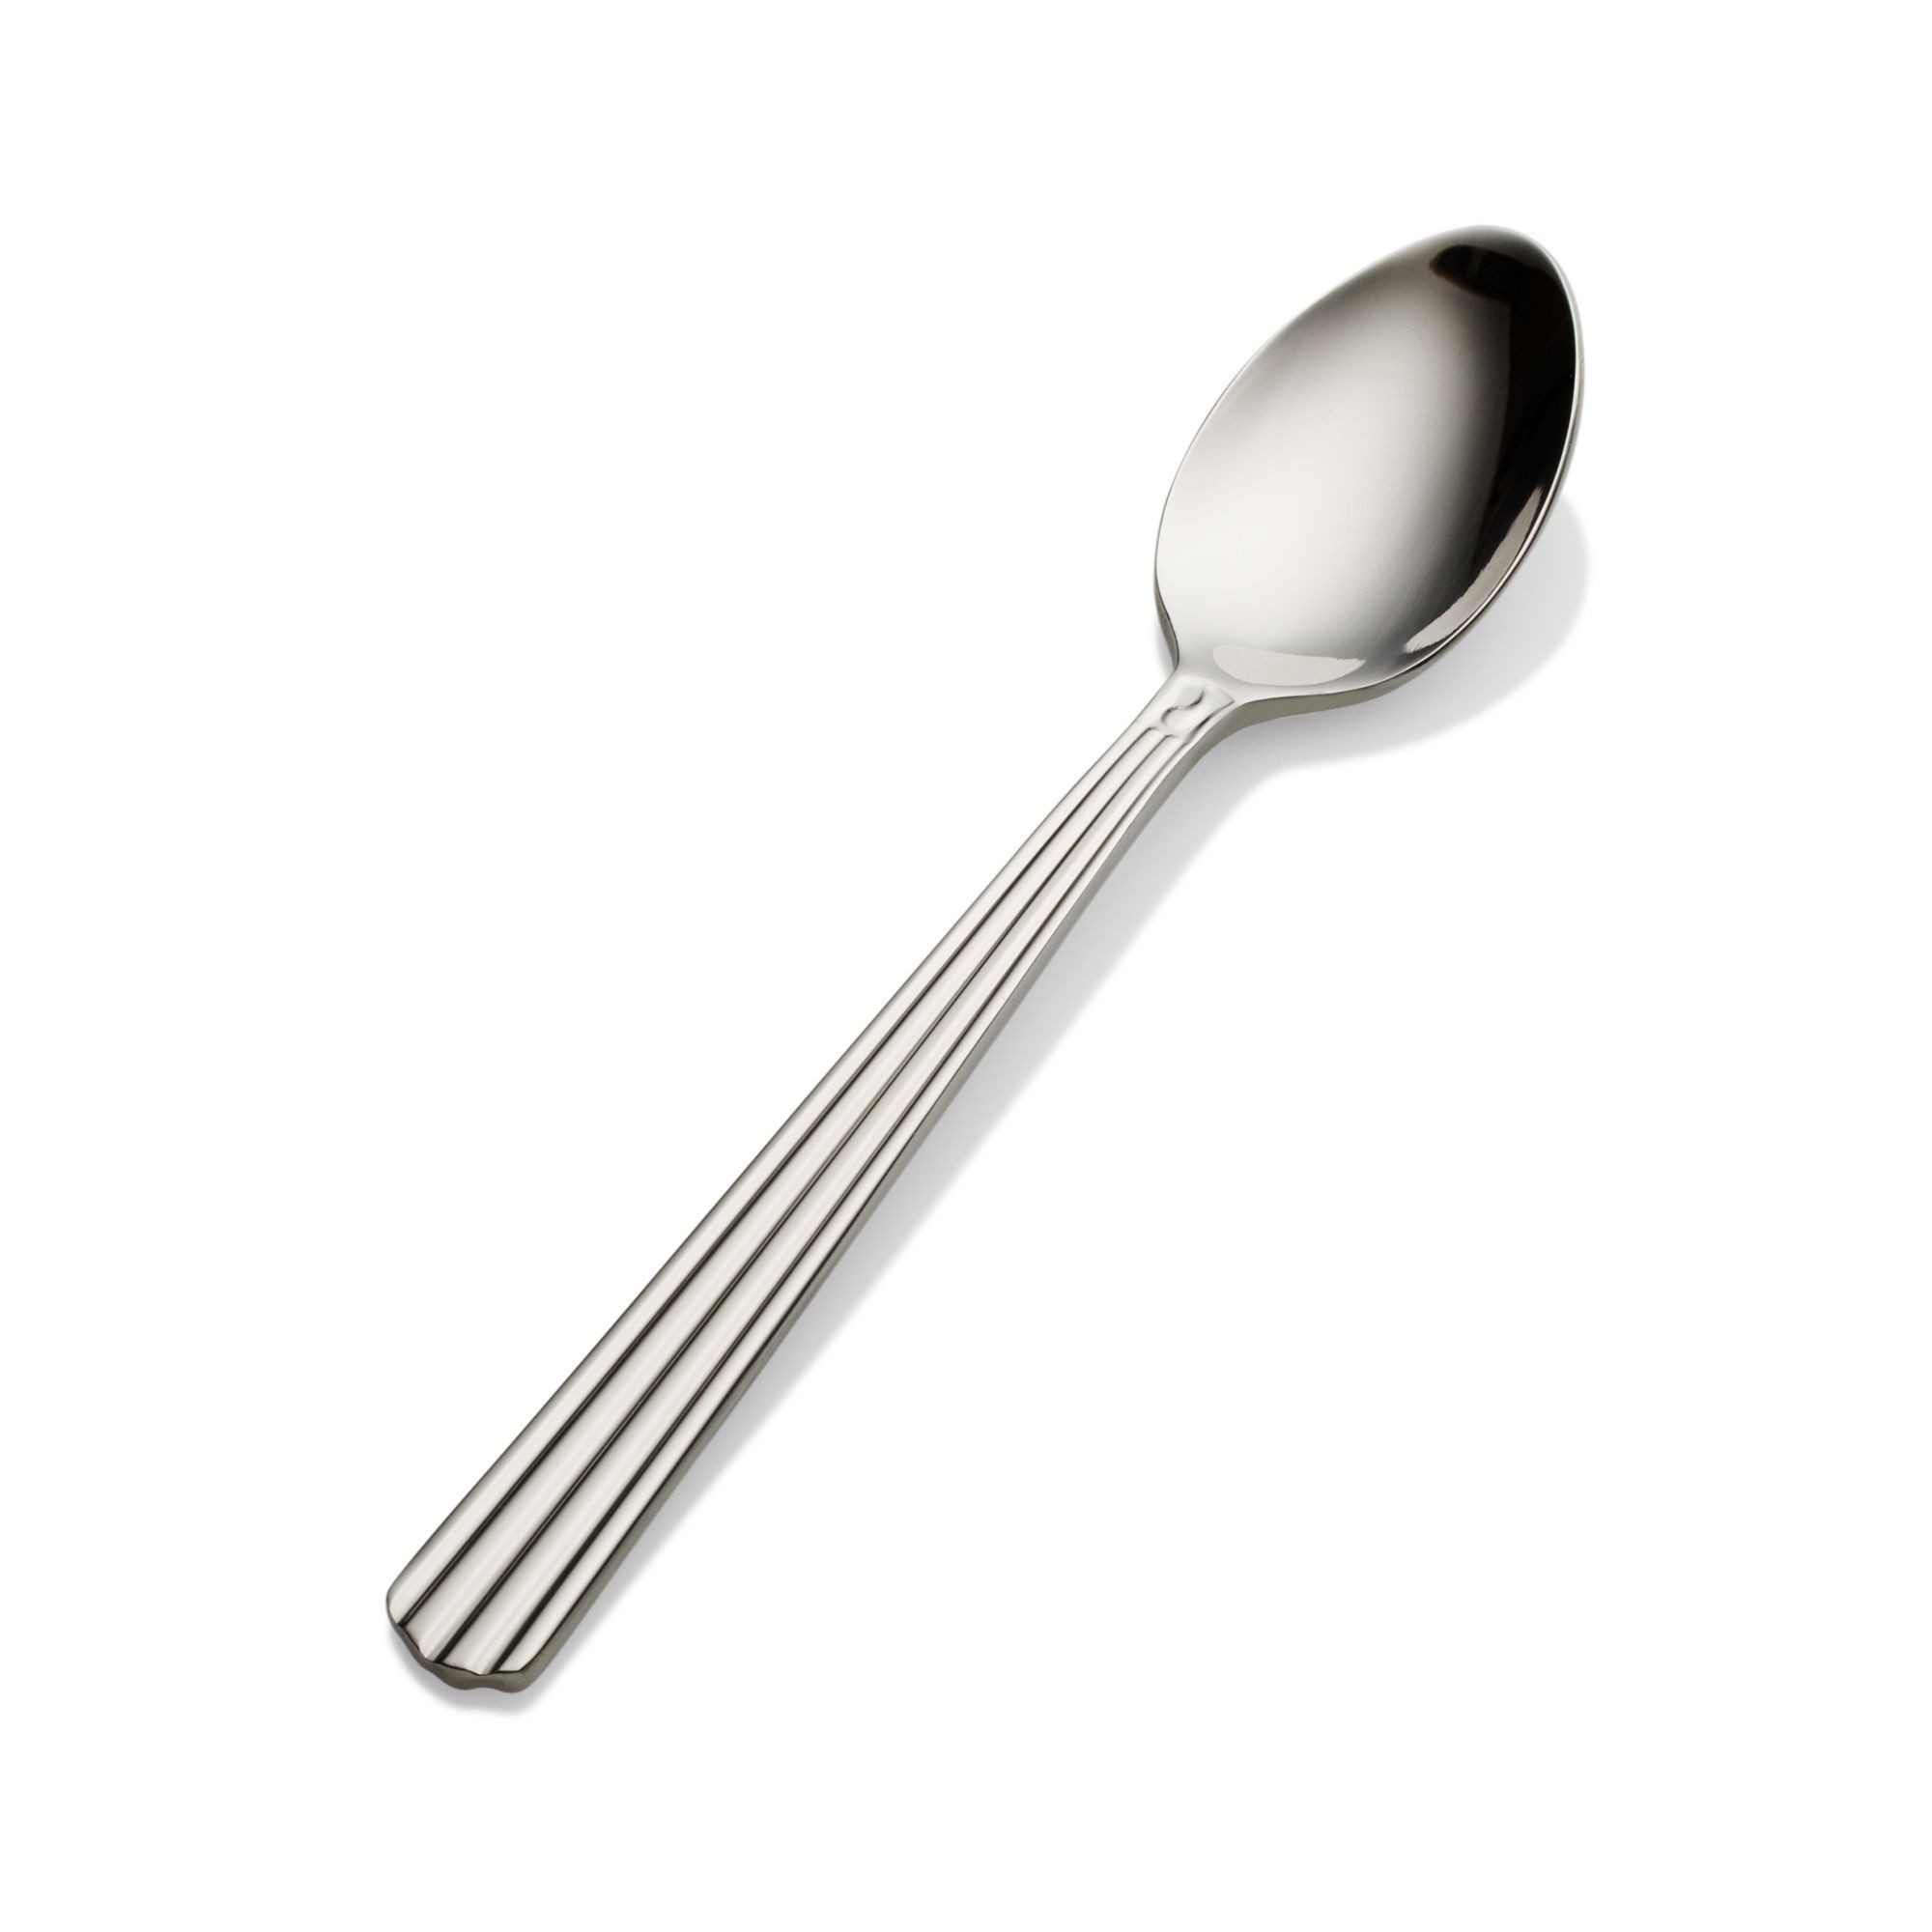 Bon Chef S1600S Britany 18/8 Stainless Steel Silverplated Teaspoon